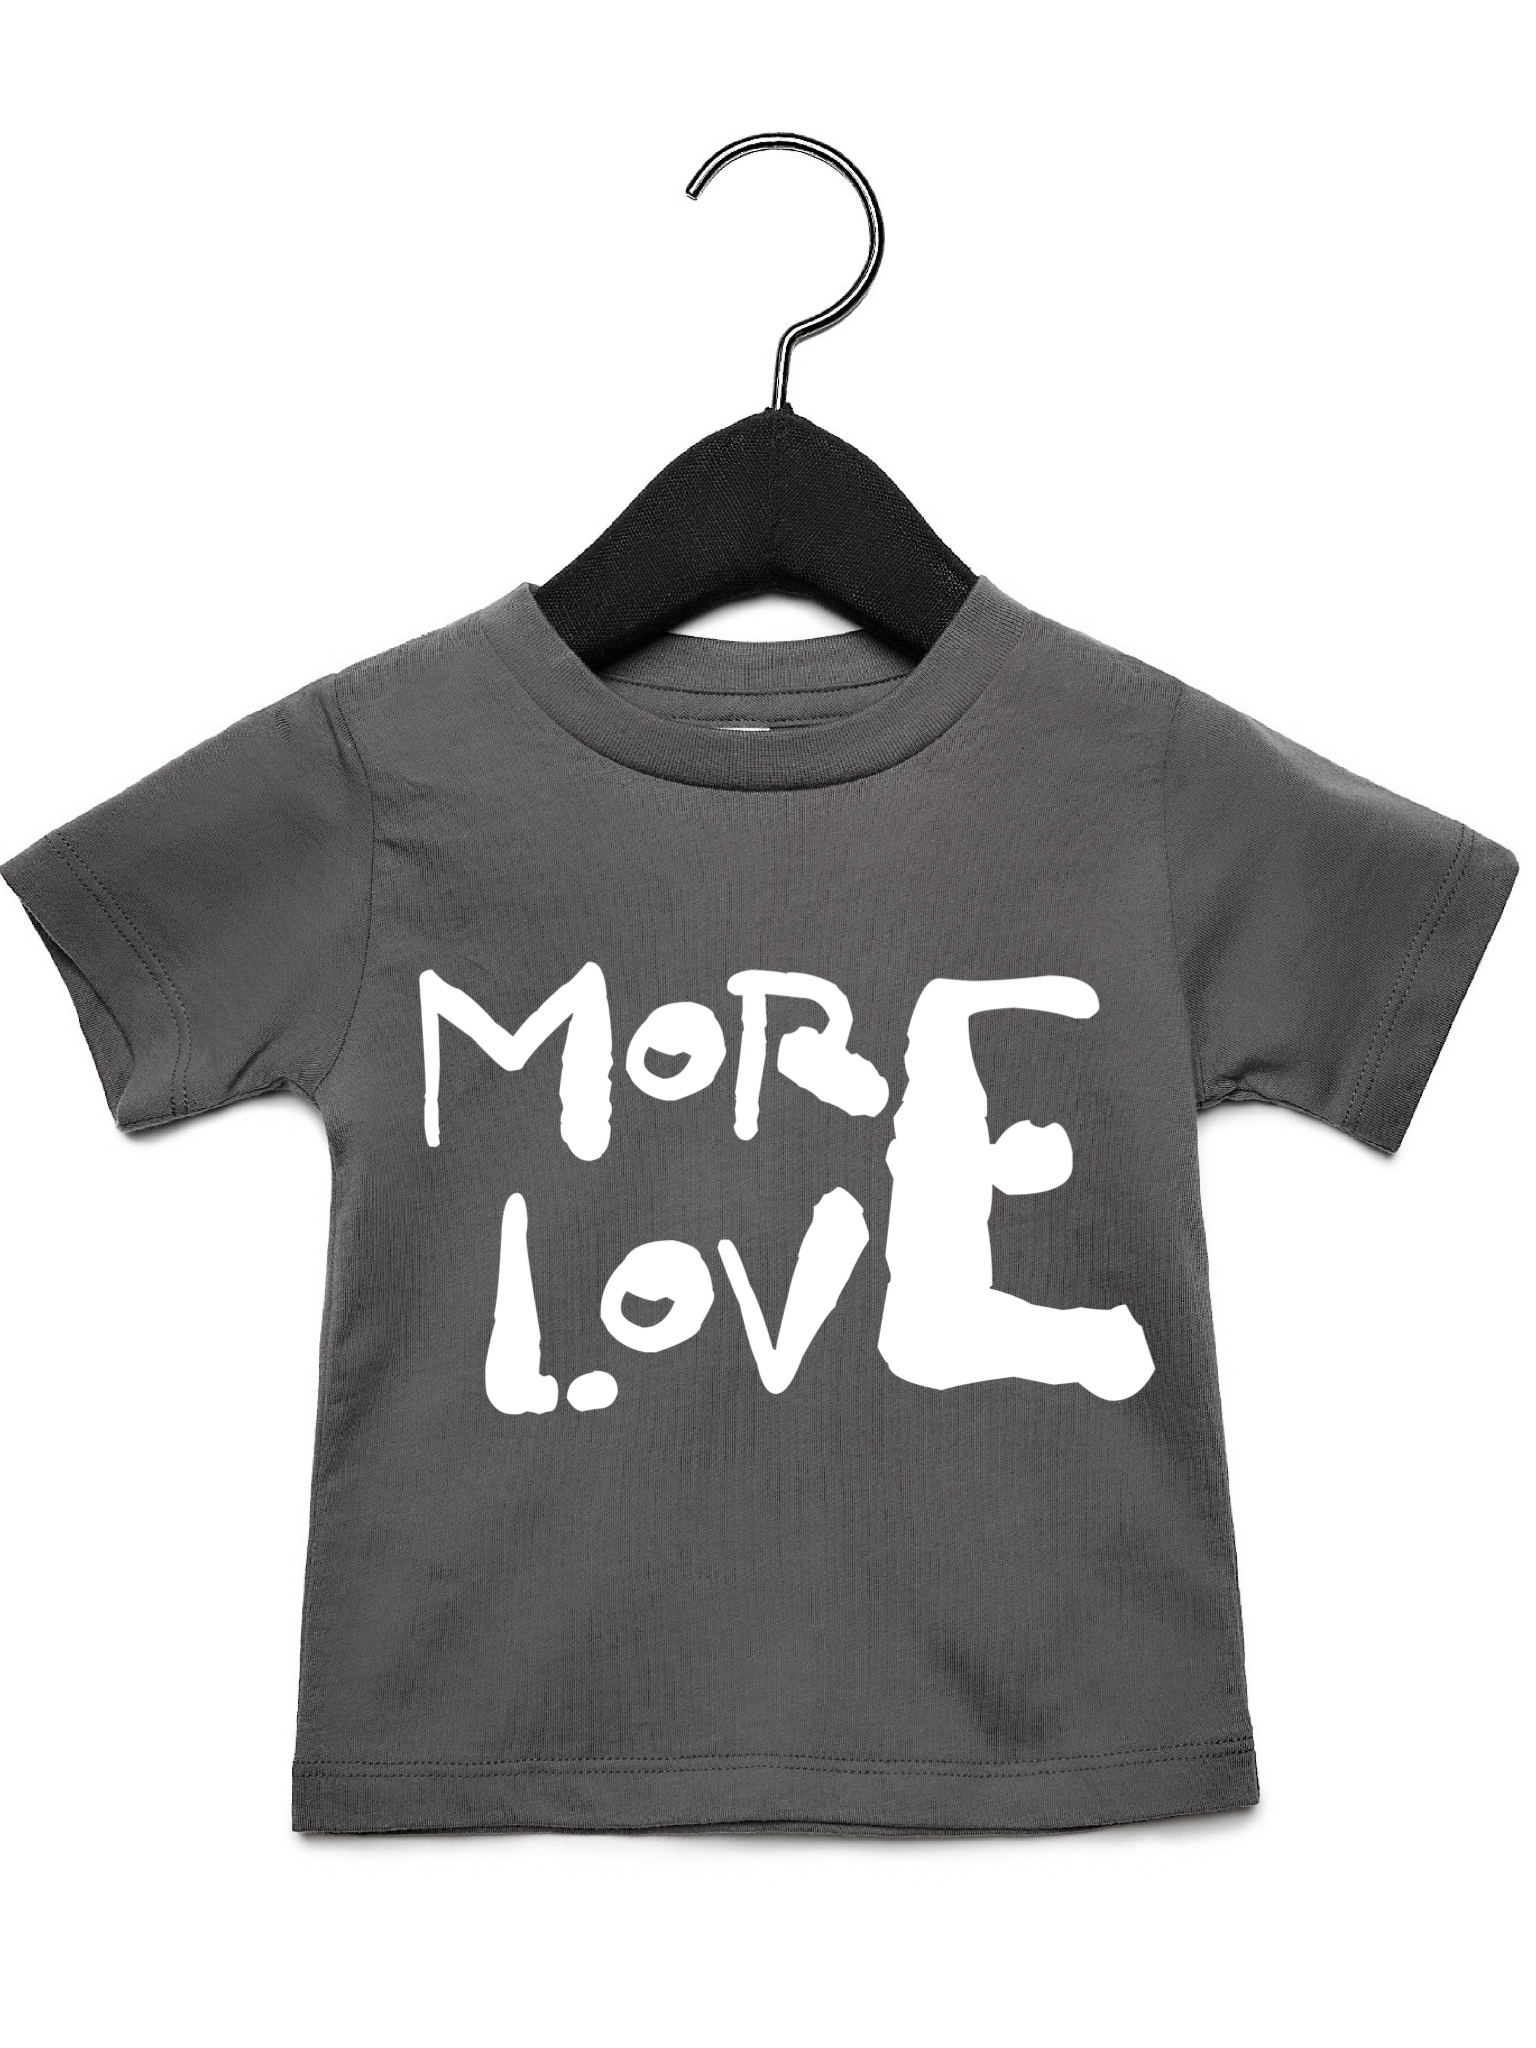 More Love Young Rebels Tee- The Rebel Tribe - kids, tees, t-shirt, white tee, graphic tee, more love, limited edition, crew neck